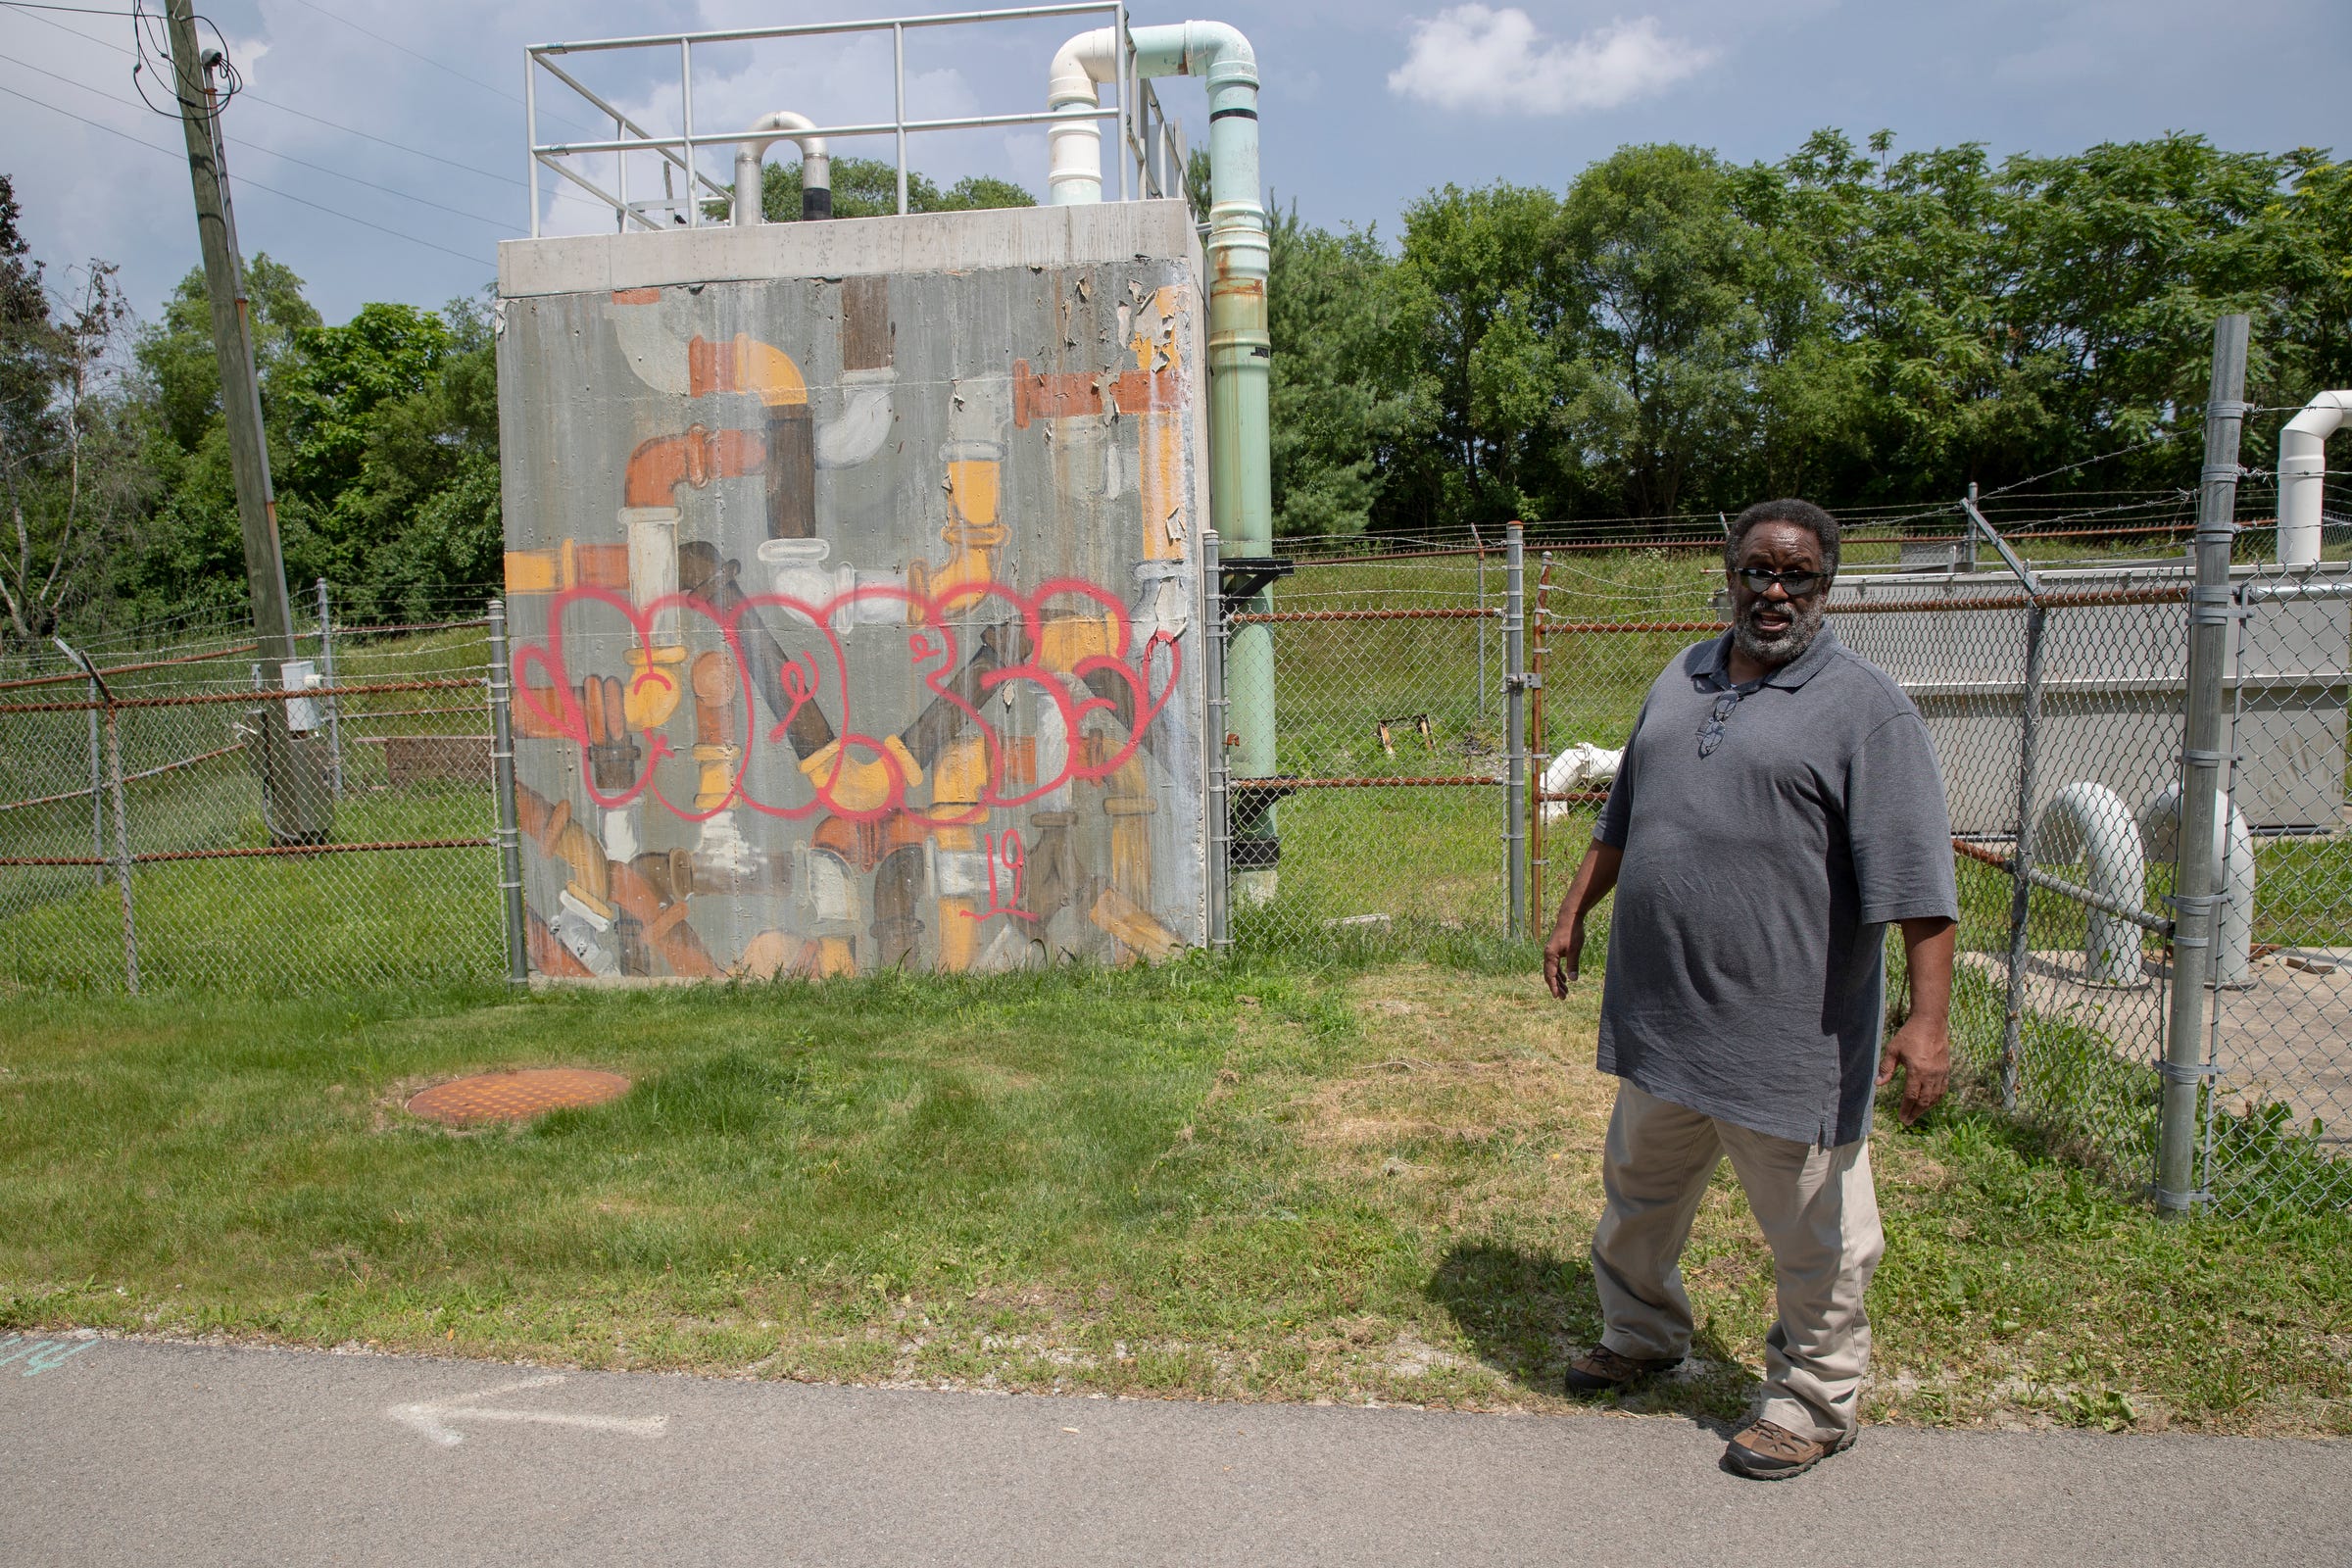 Leon Bates, who lives near Fall Creek, became aware of pollution as a child while playing along it. On Tuesday, July 3, 2019, he's standing by the Monon Interceptor, which receives sewage from Broad Ripple and Nora several miles to the north and pumps it into Fall Creek during rainy overflow conditions.